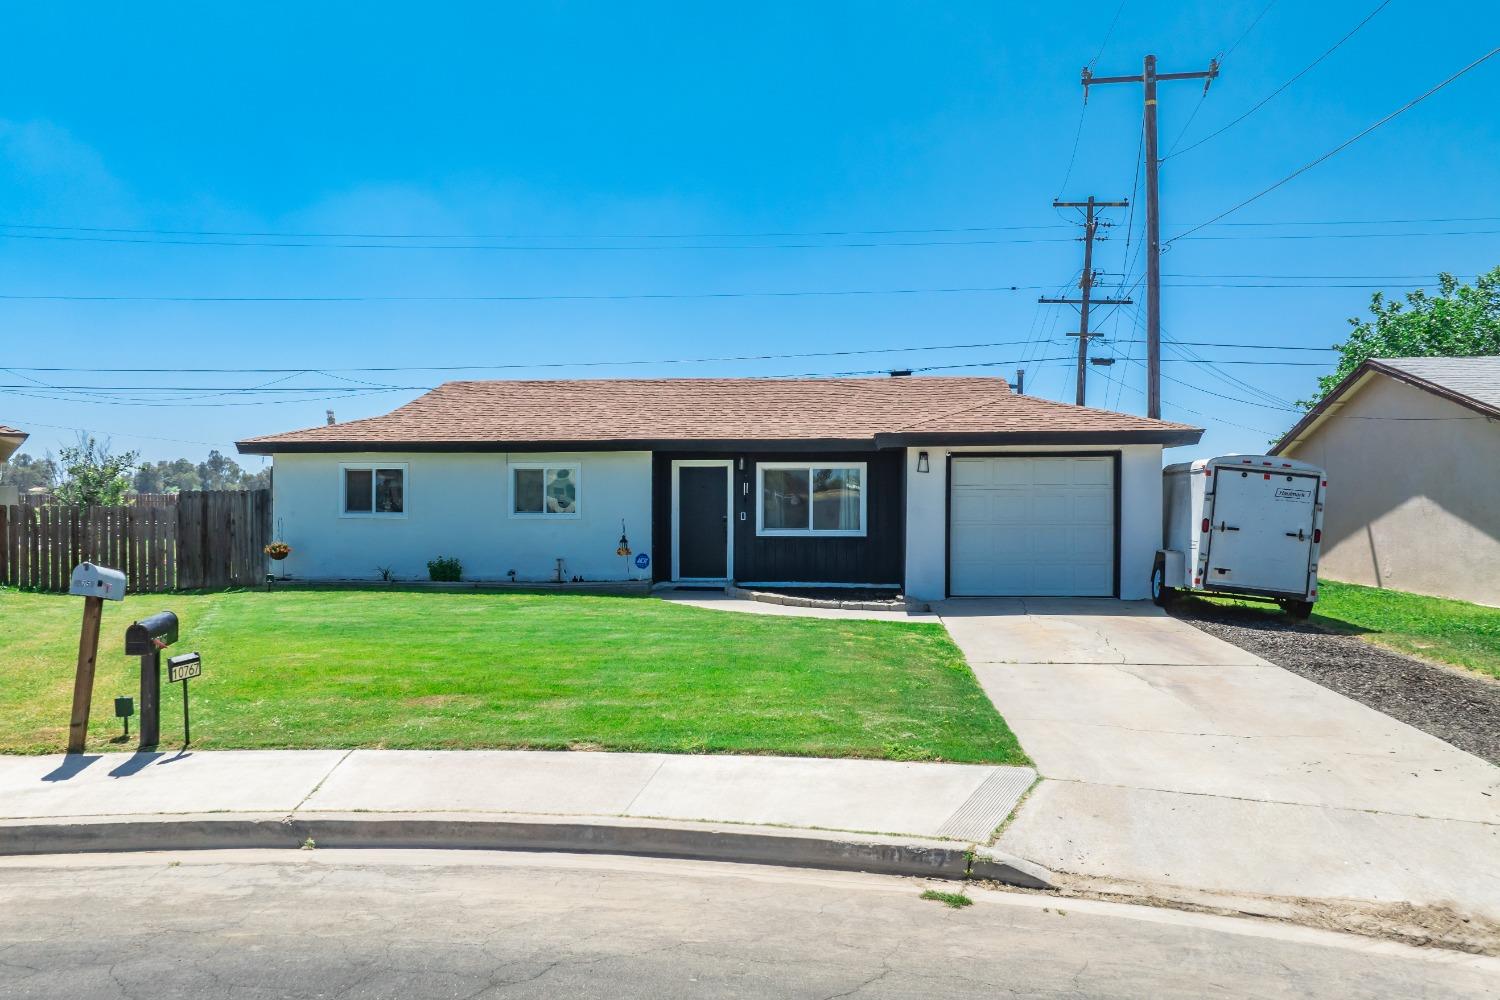 Photo of 10767 Beverly Dr in Hanford, CA